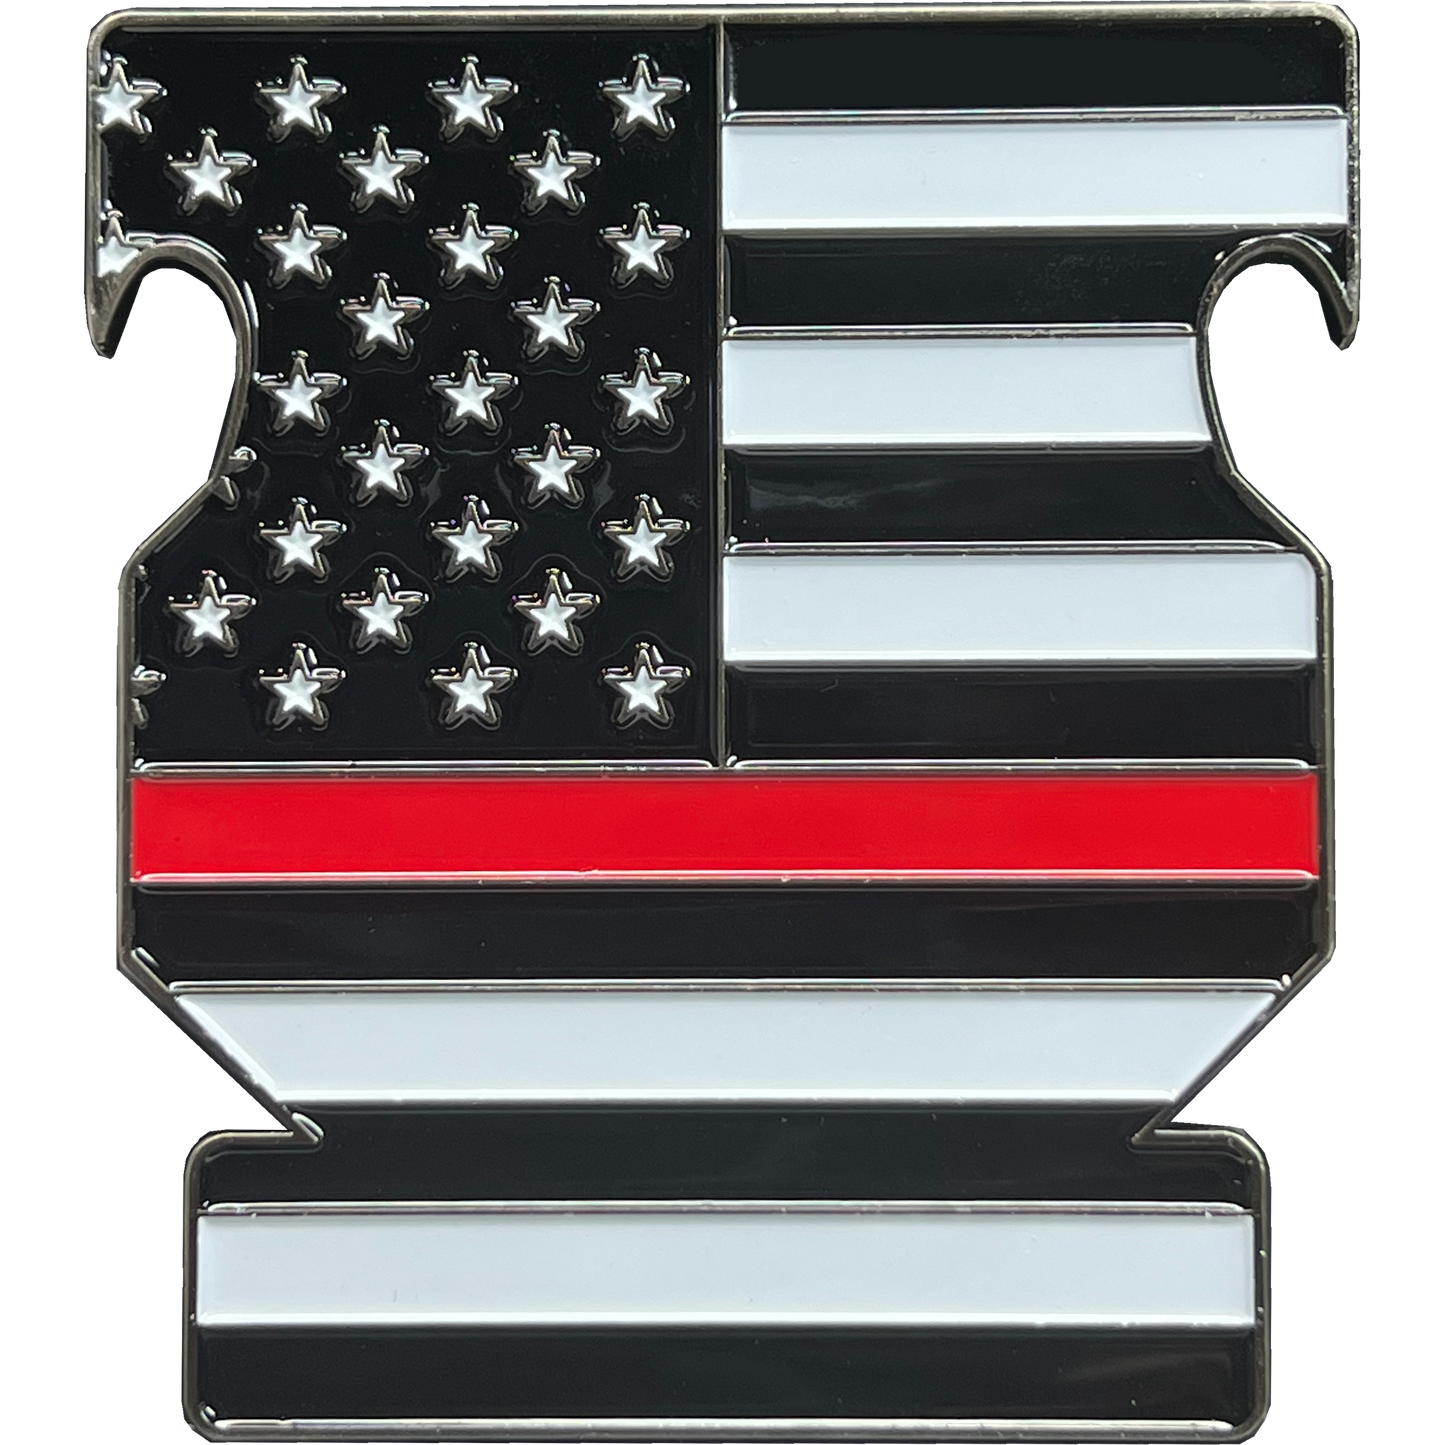 BL3-018 Thin Red Line Fire Fighter Challenge Coin Bottle Opener Fire Department Fireman